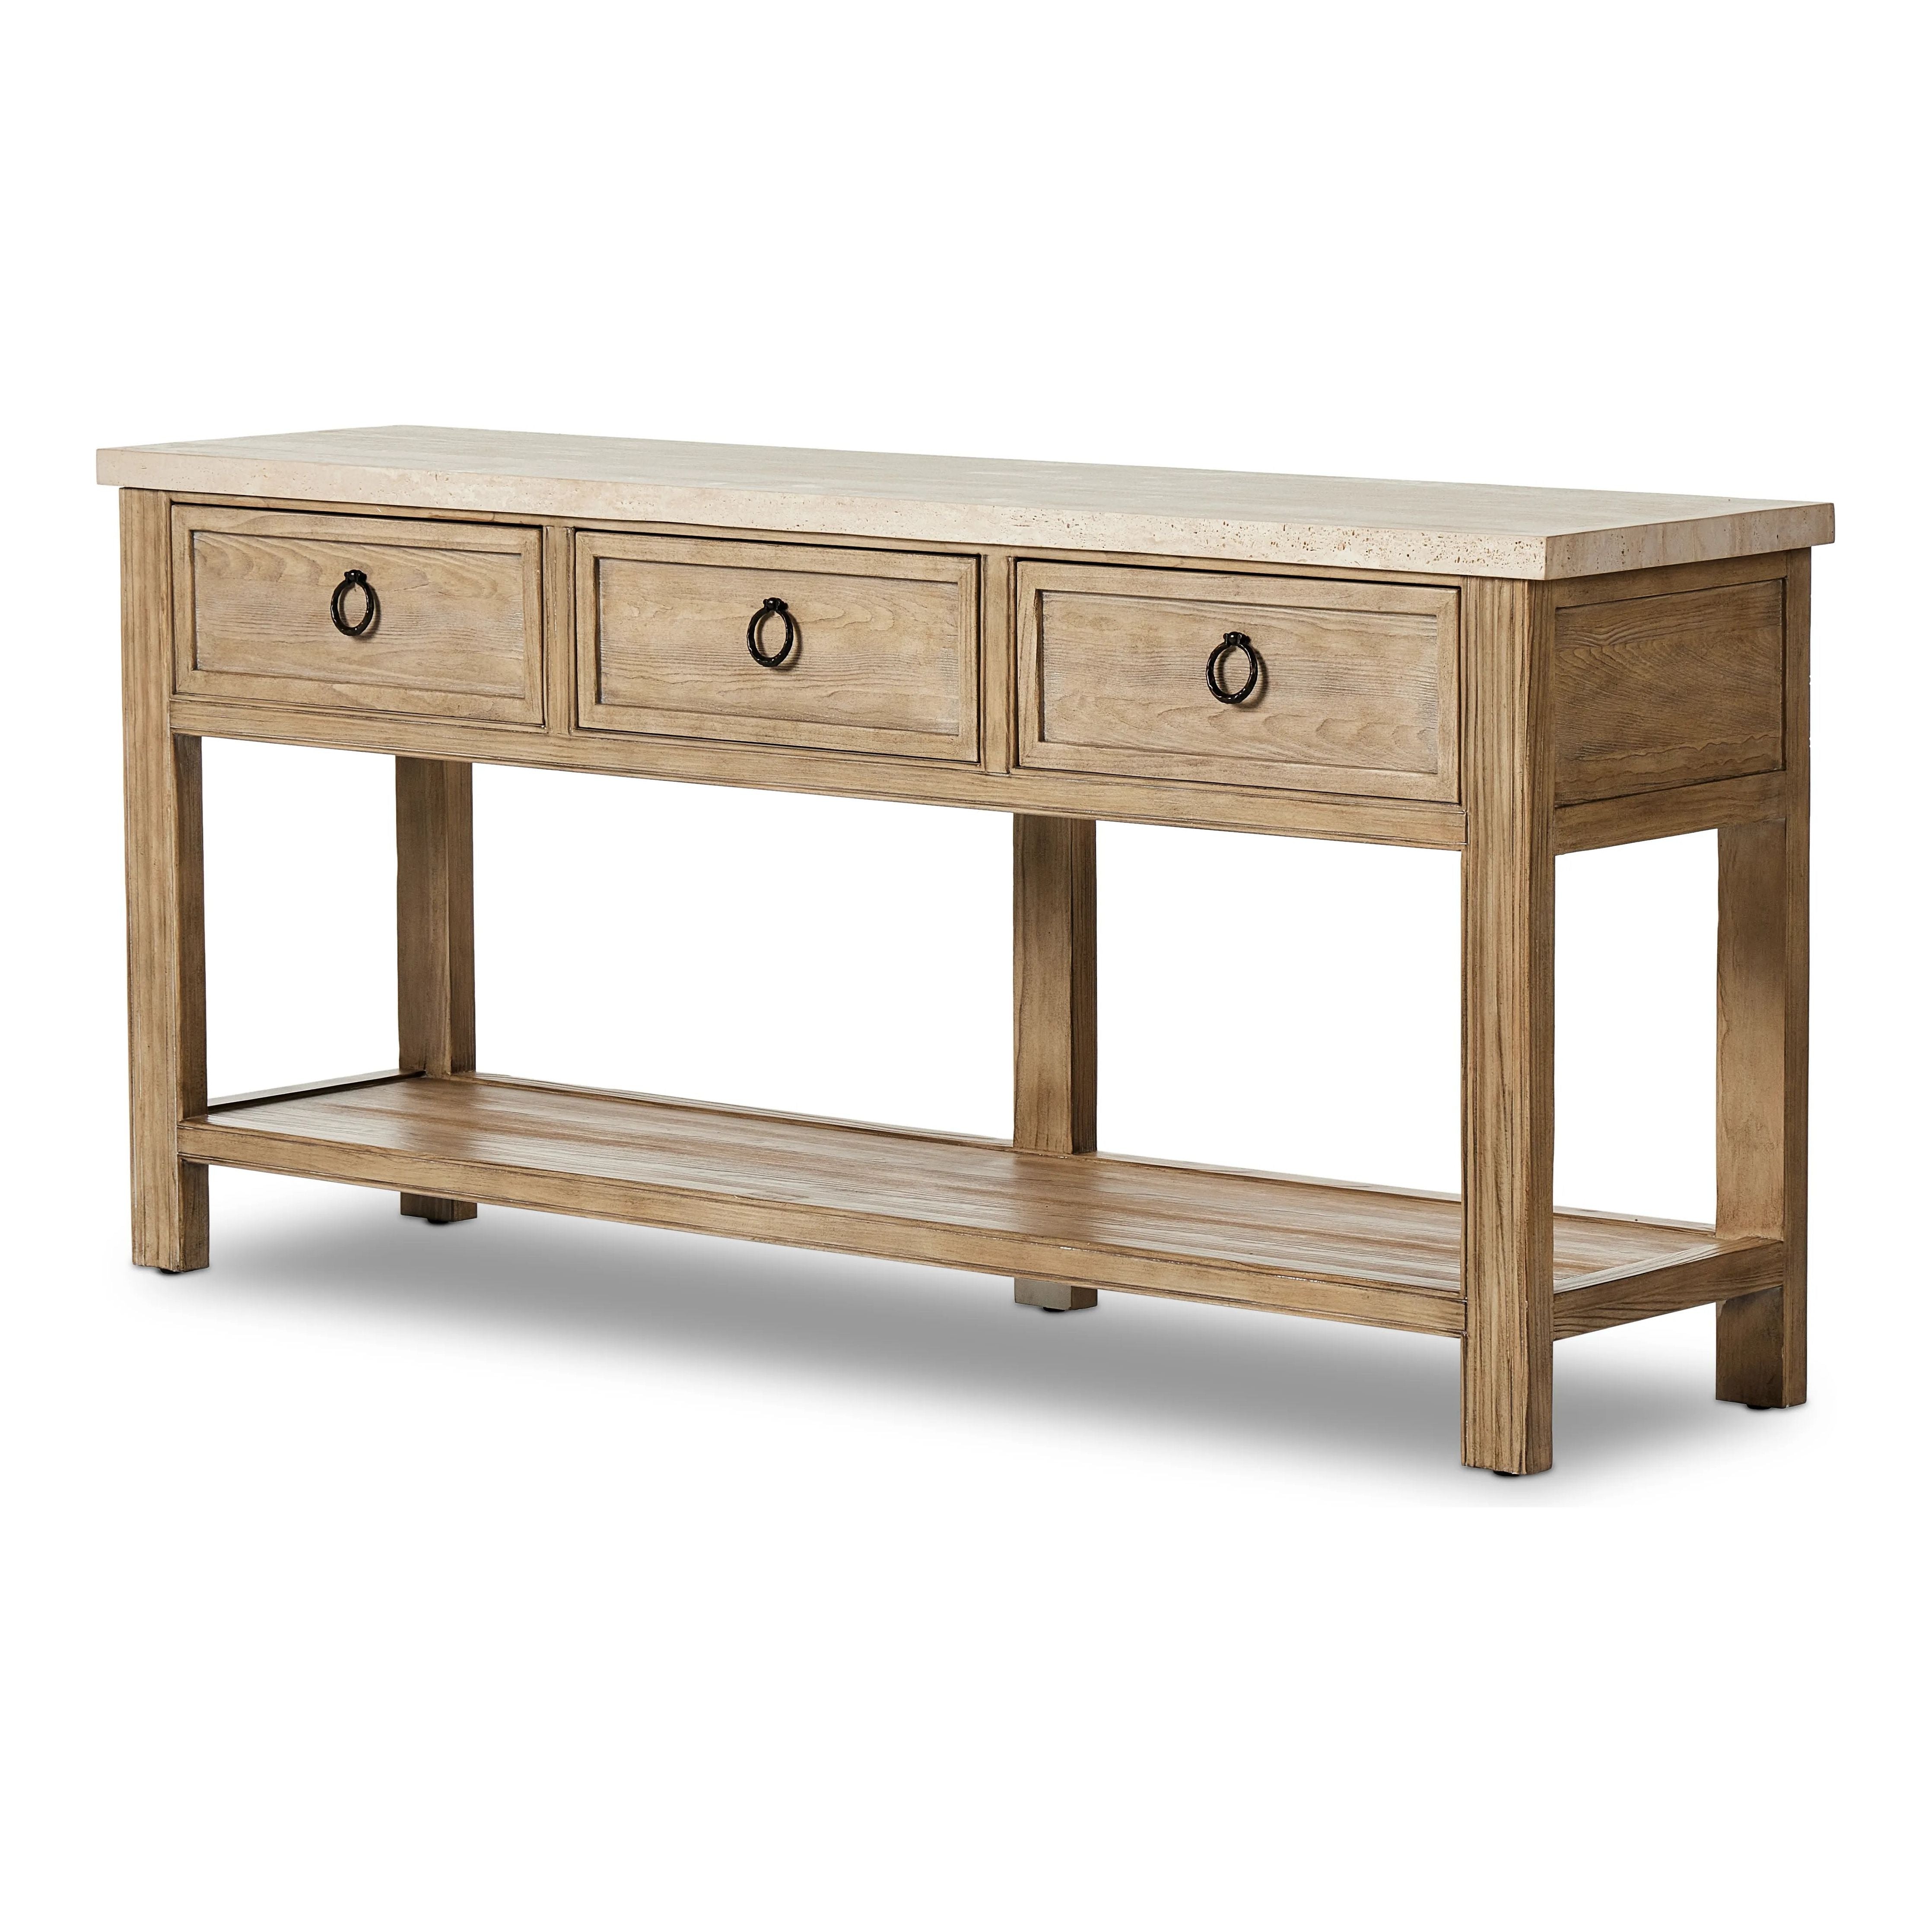 Bring bonus storage space to the media room or entryway. Made from solid pine and finished in an ash grey, with facet detailing and a smooth, silver travertine top. Handmade hardware adorns three spacious drawers. By the makers at Van Thiel, known for their antique-inspired pieces and hand-applied finishes.Collection: Van Thie Amethyst Home provides interior design, new home construction design consulting, vintage area rugs, and lighting in the Omaha metro area.